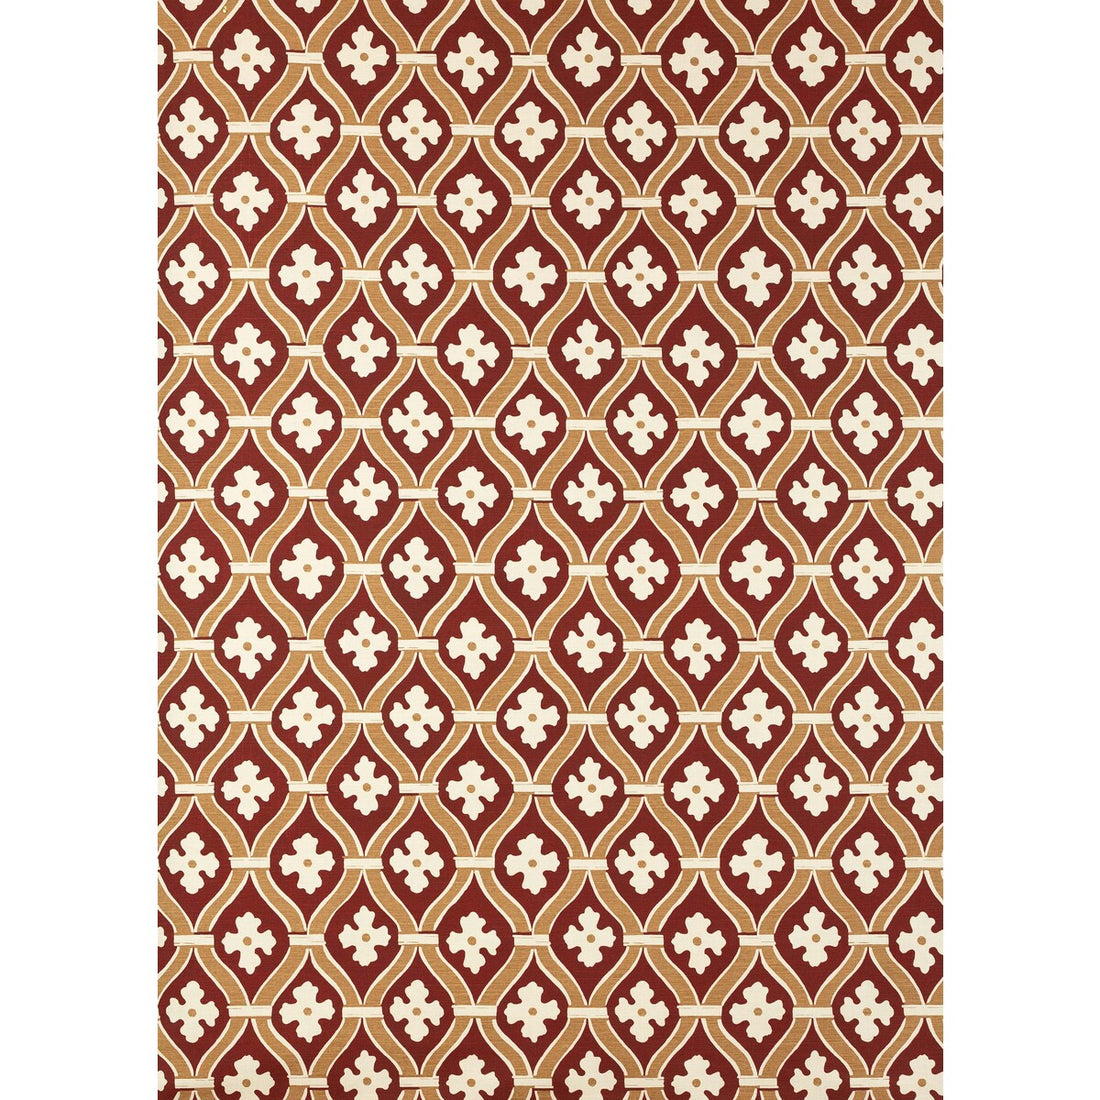 Byblos fabric in rust/faded brown color - pattern 2022121.619.0 - by Lee Jofa in the Paolo Moschino Persepolis collection